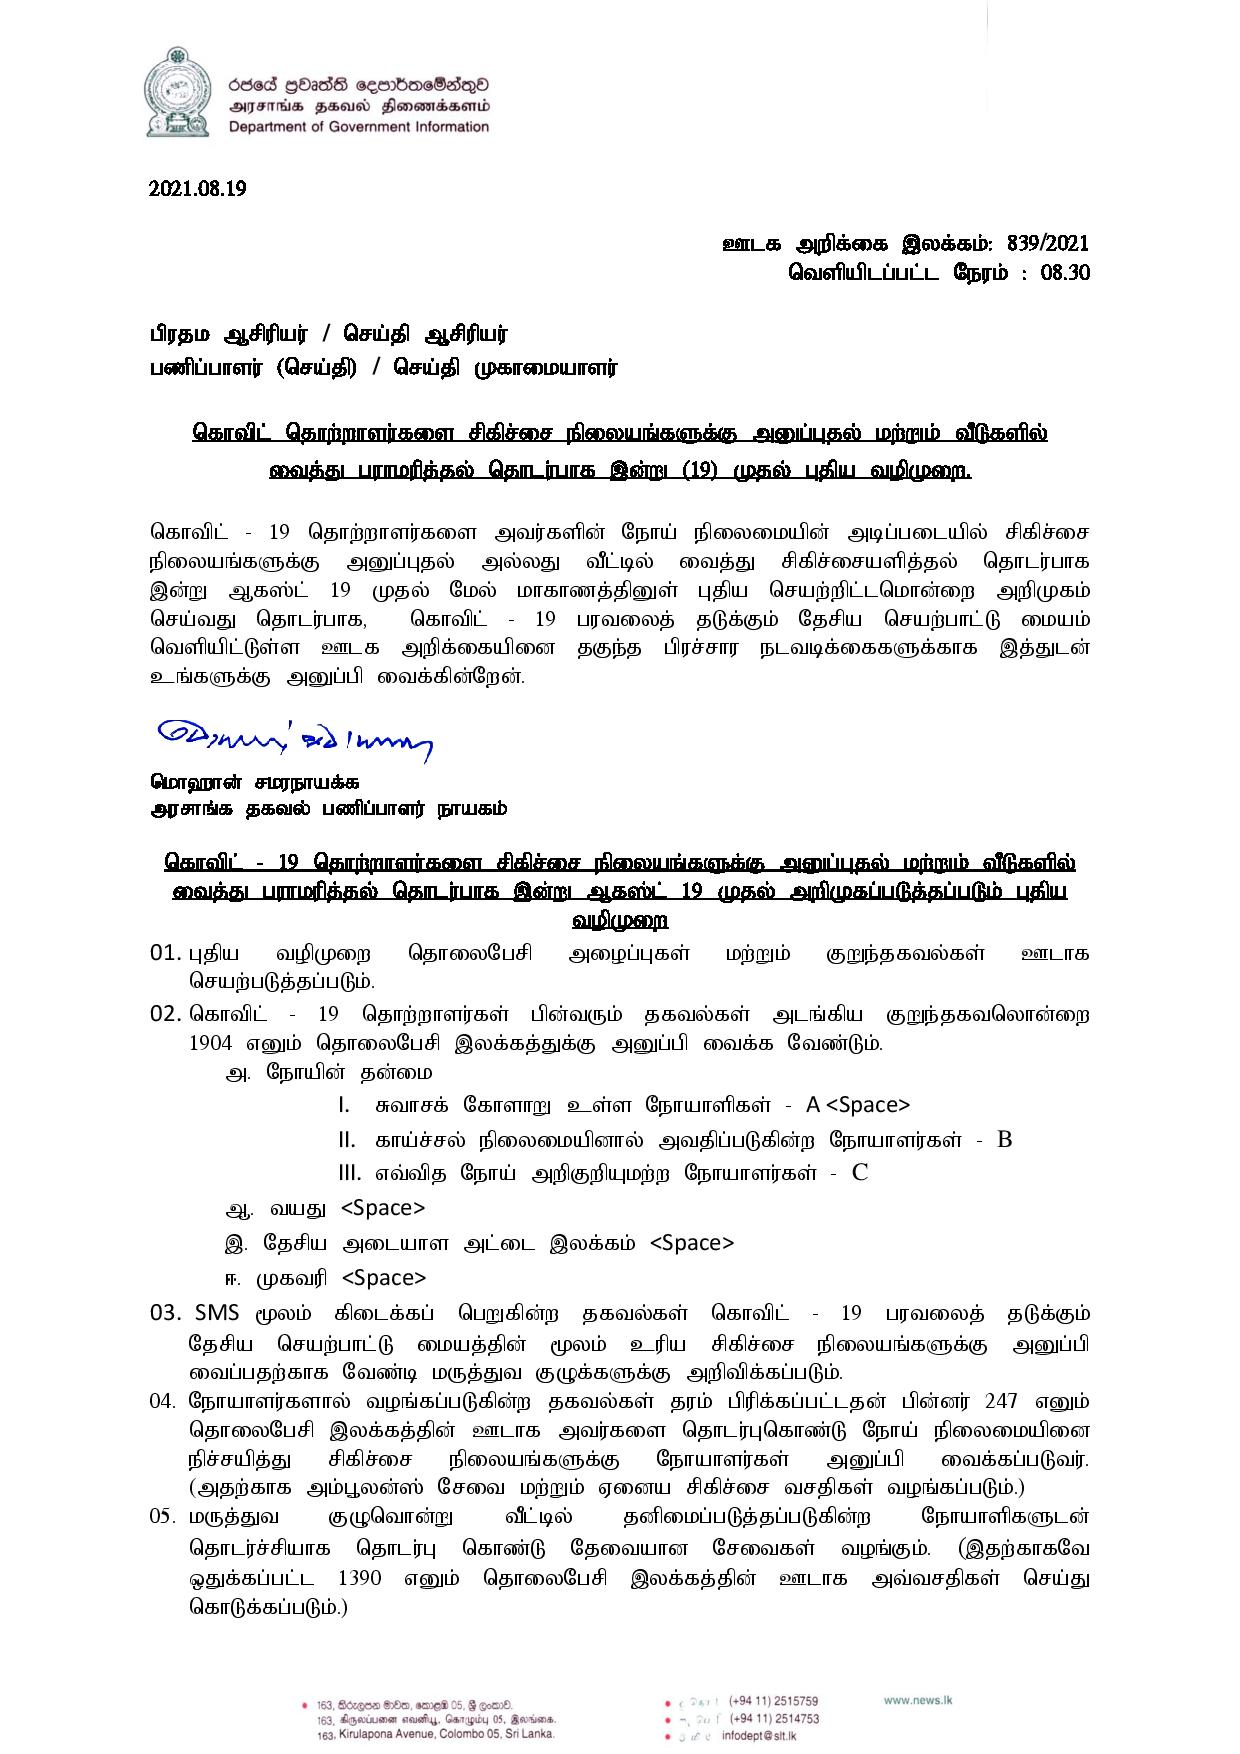 Press Release 839 Tamil page 001 1